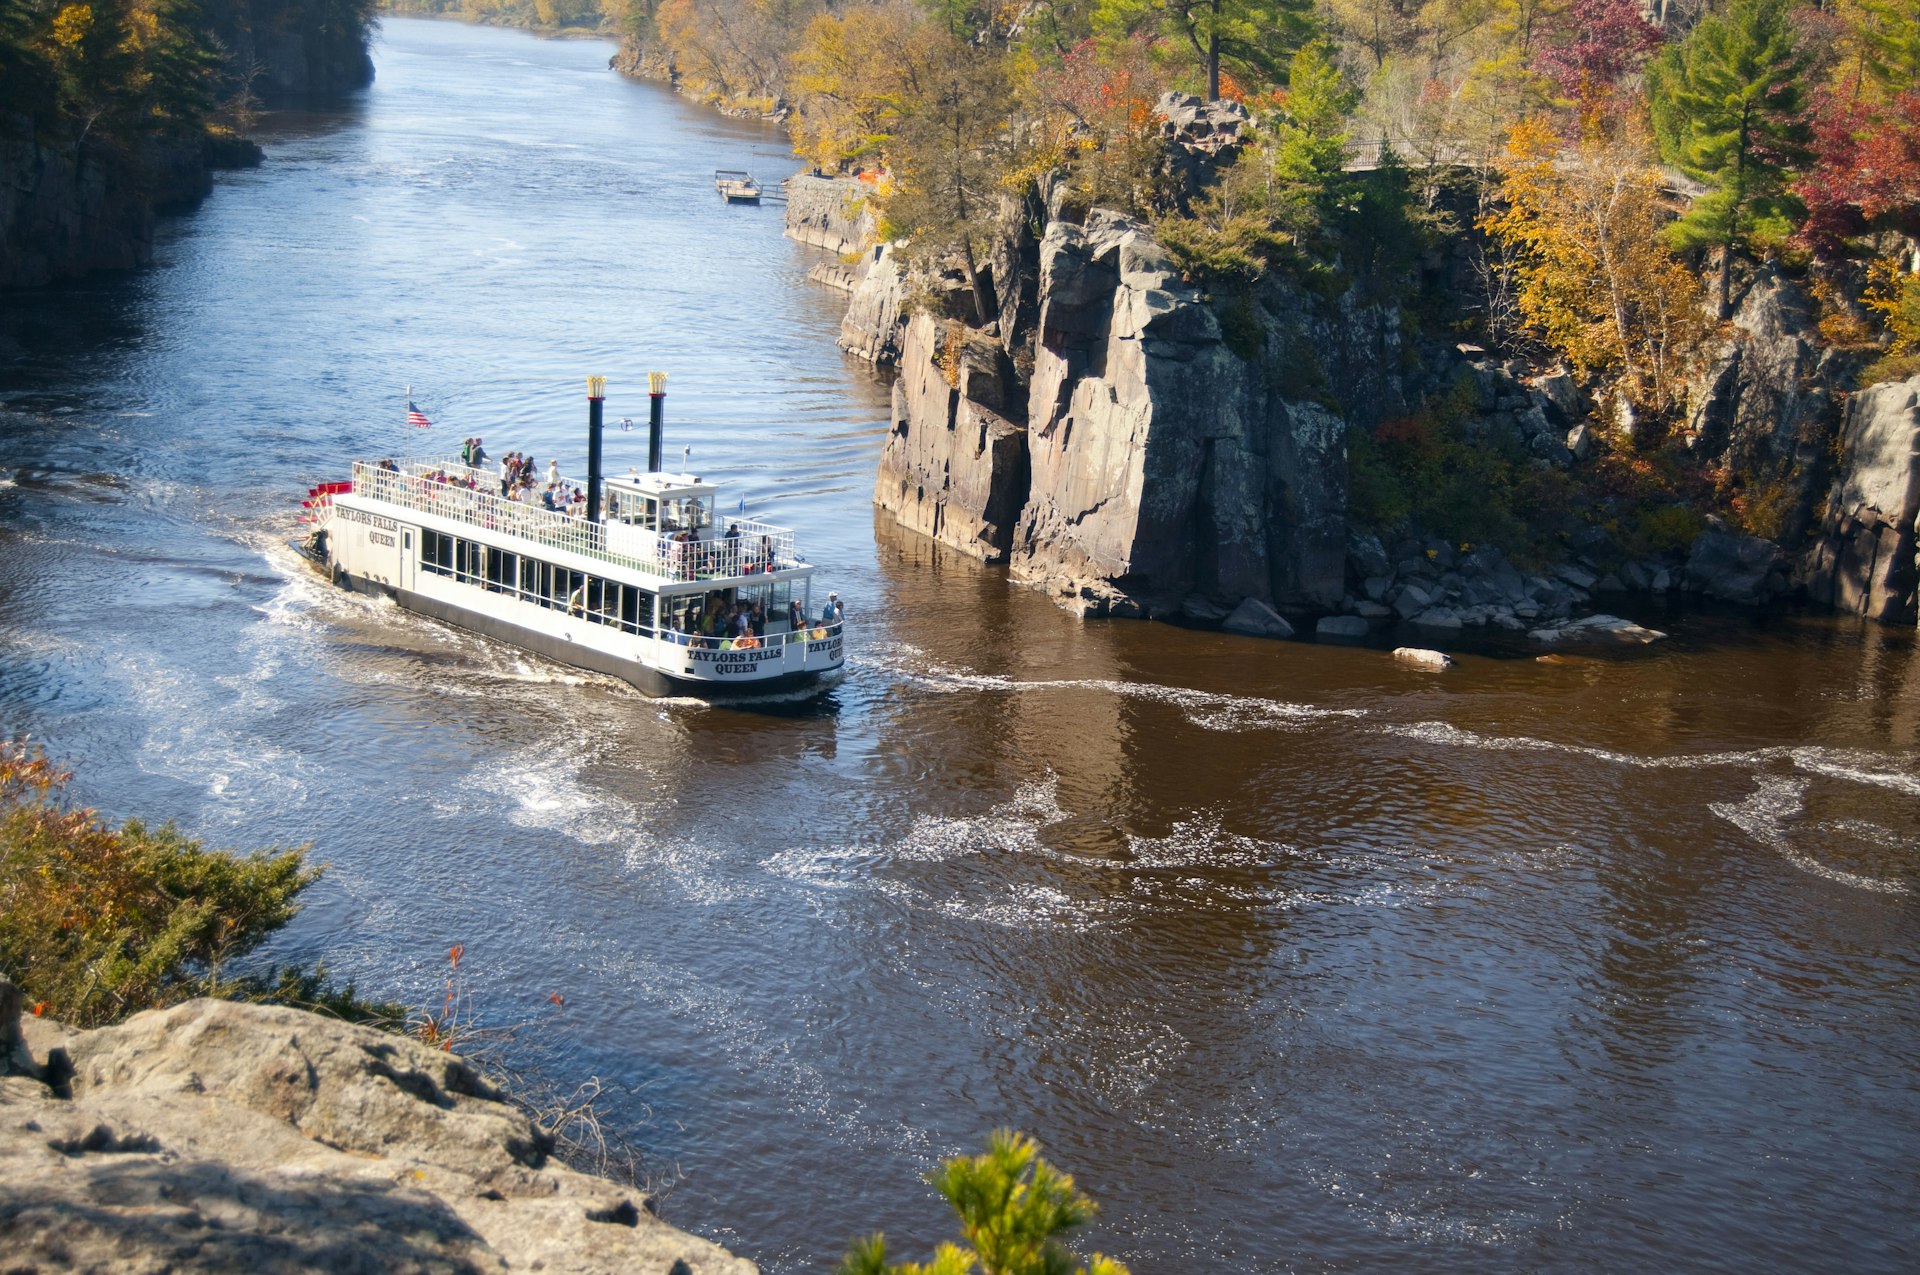  Boat on the St. Croix River